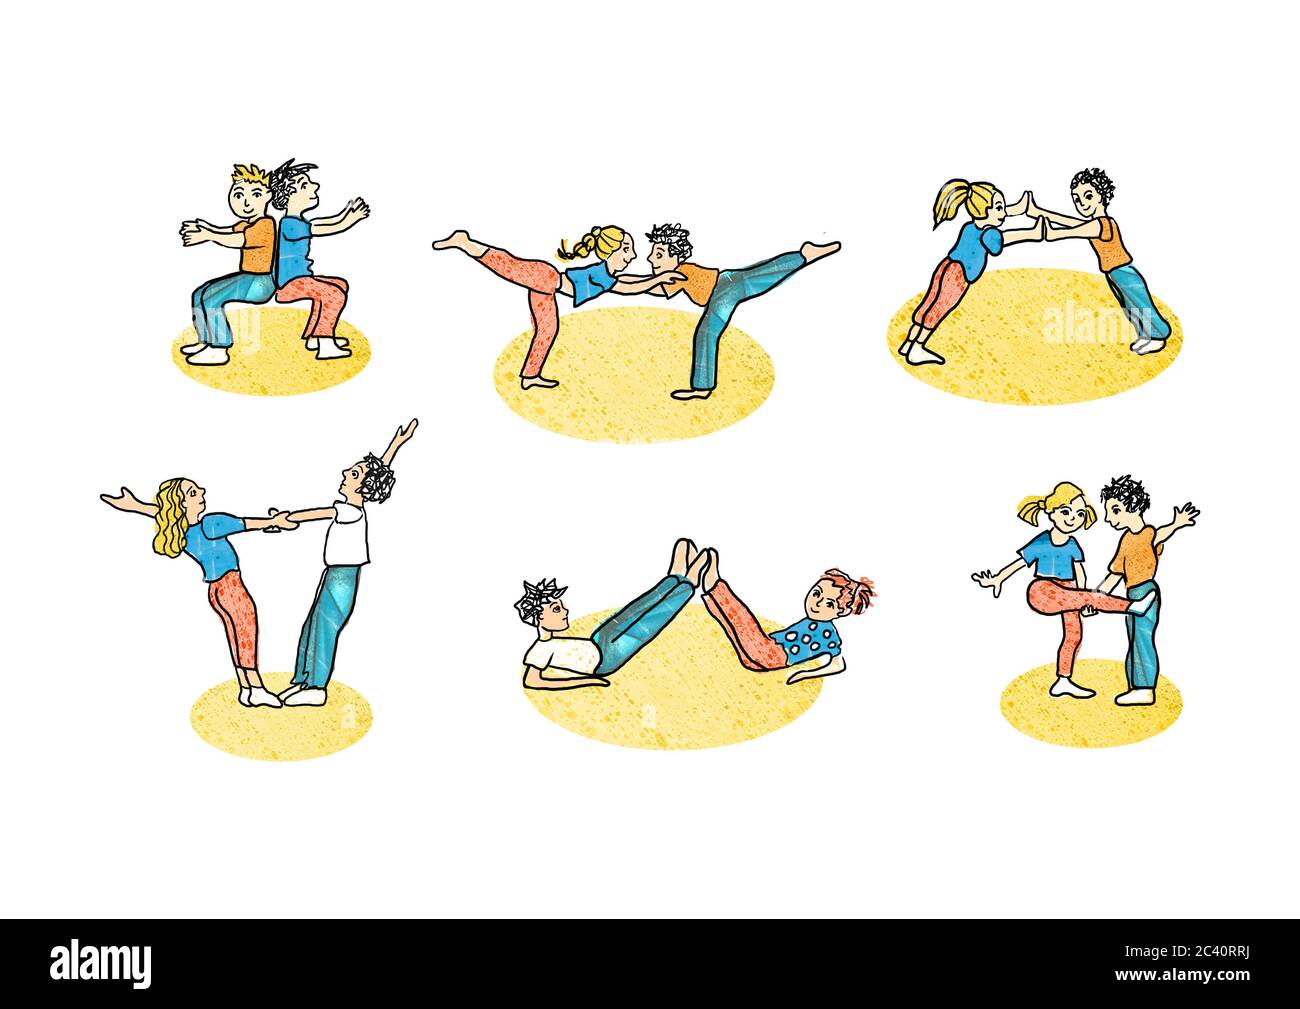 Exercises for children's physical education. Boy and girl sports illustration. Stock Photo